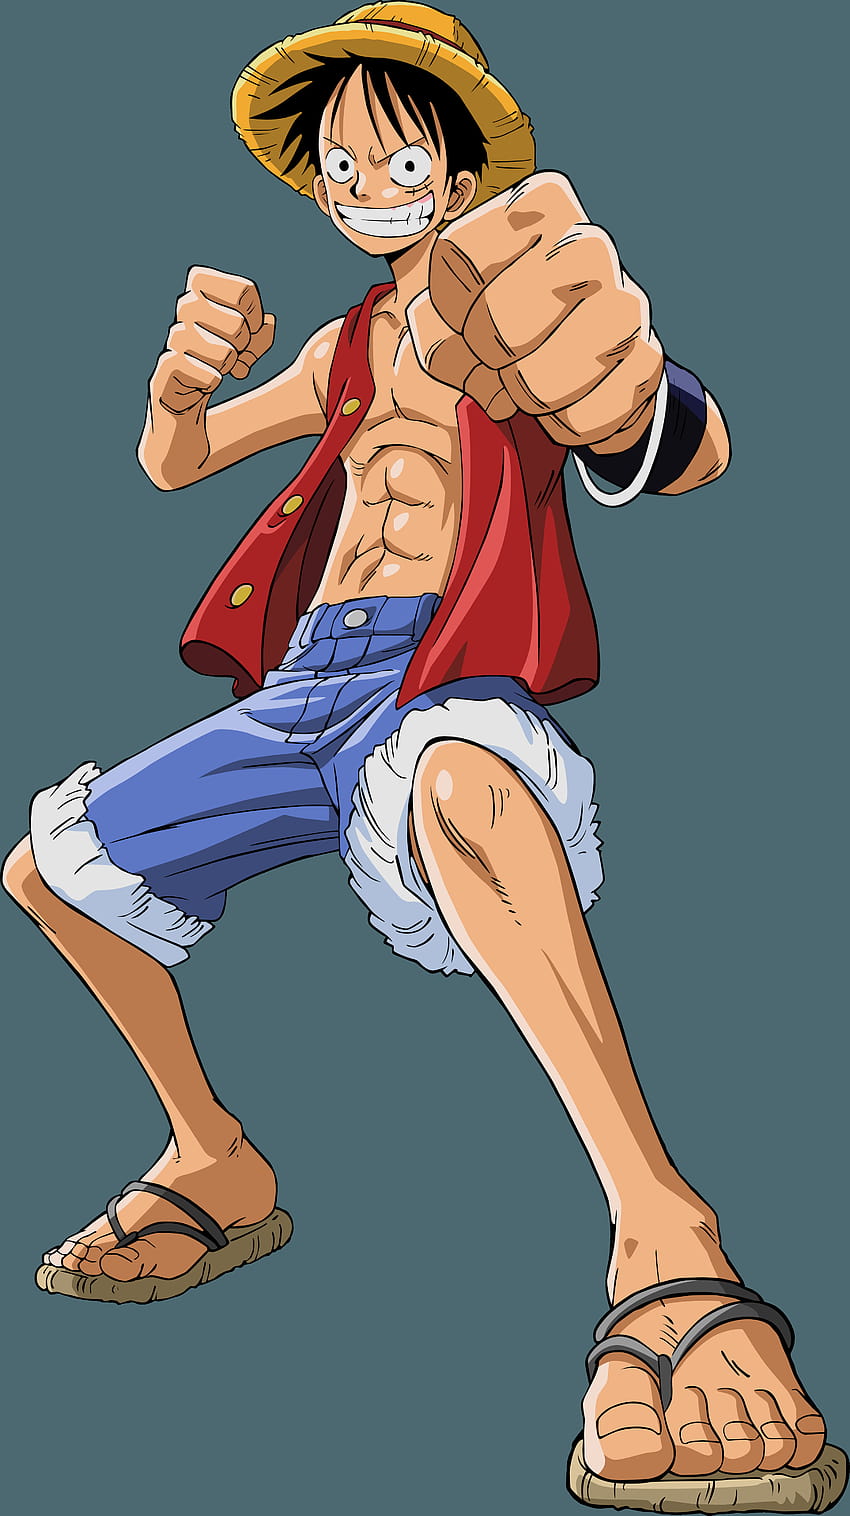 Nami Monkey D. Luffy T-shirt Jolly Roger Roronoa Zoro, jolly, flag, smiley,  piracy png | PNGWing